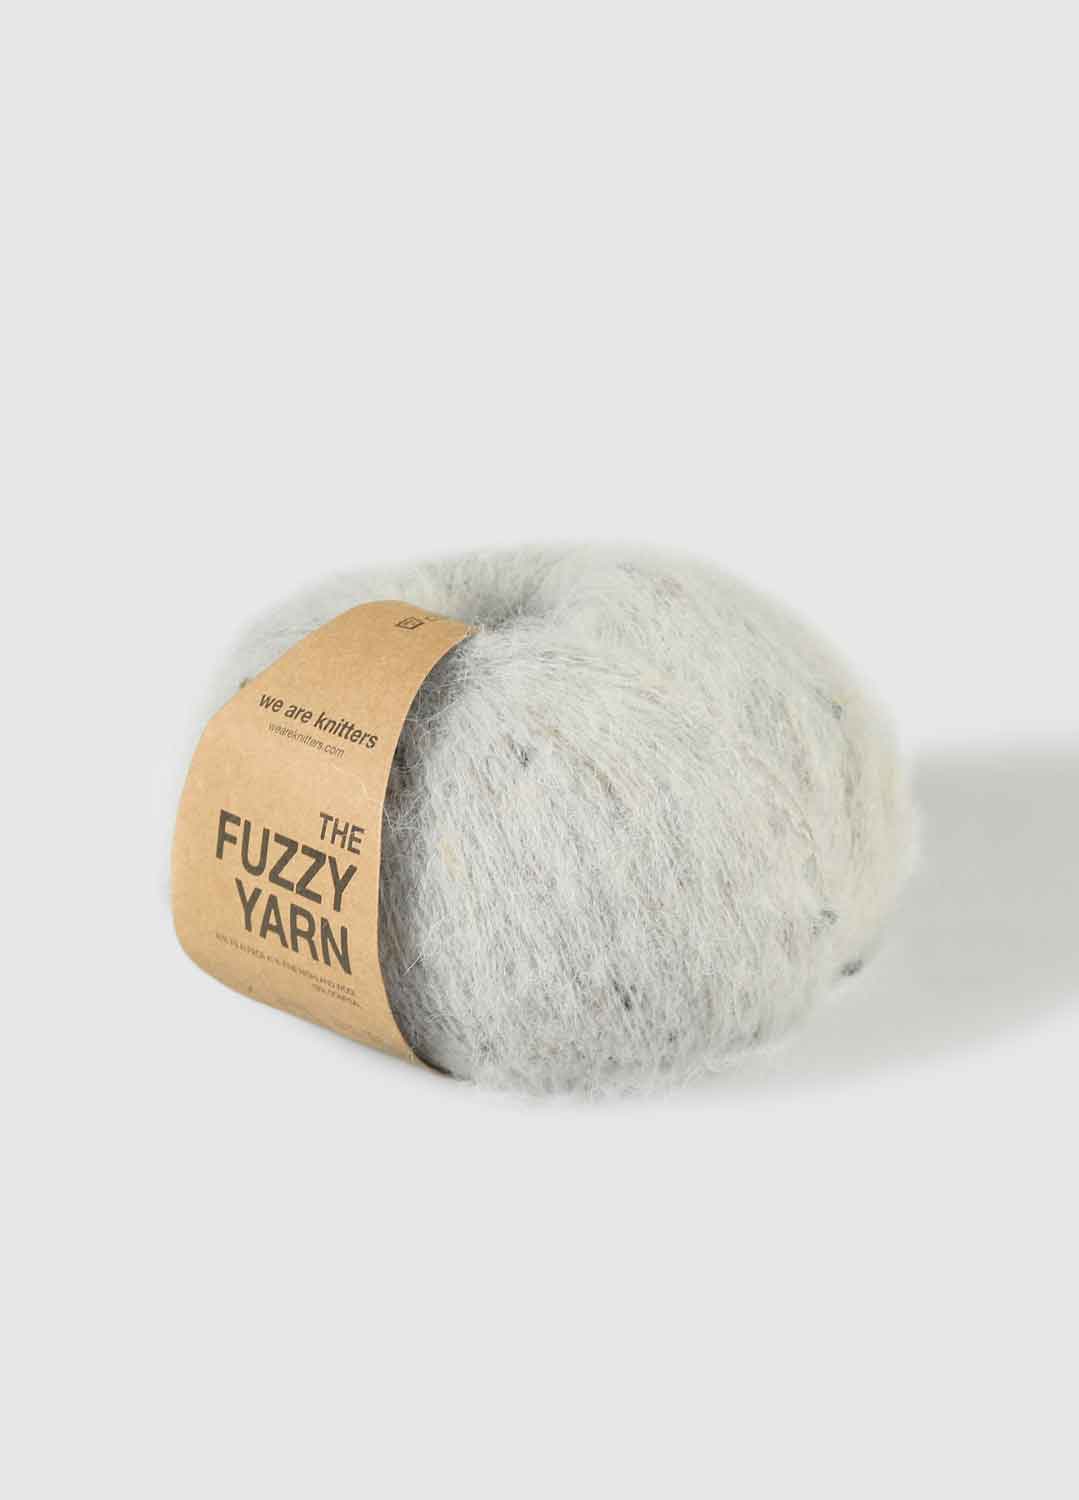 Trendwatch: Fluffy and furry yarns